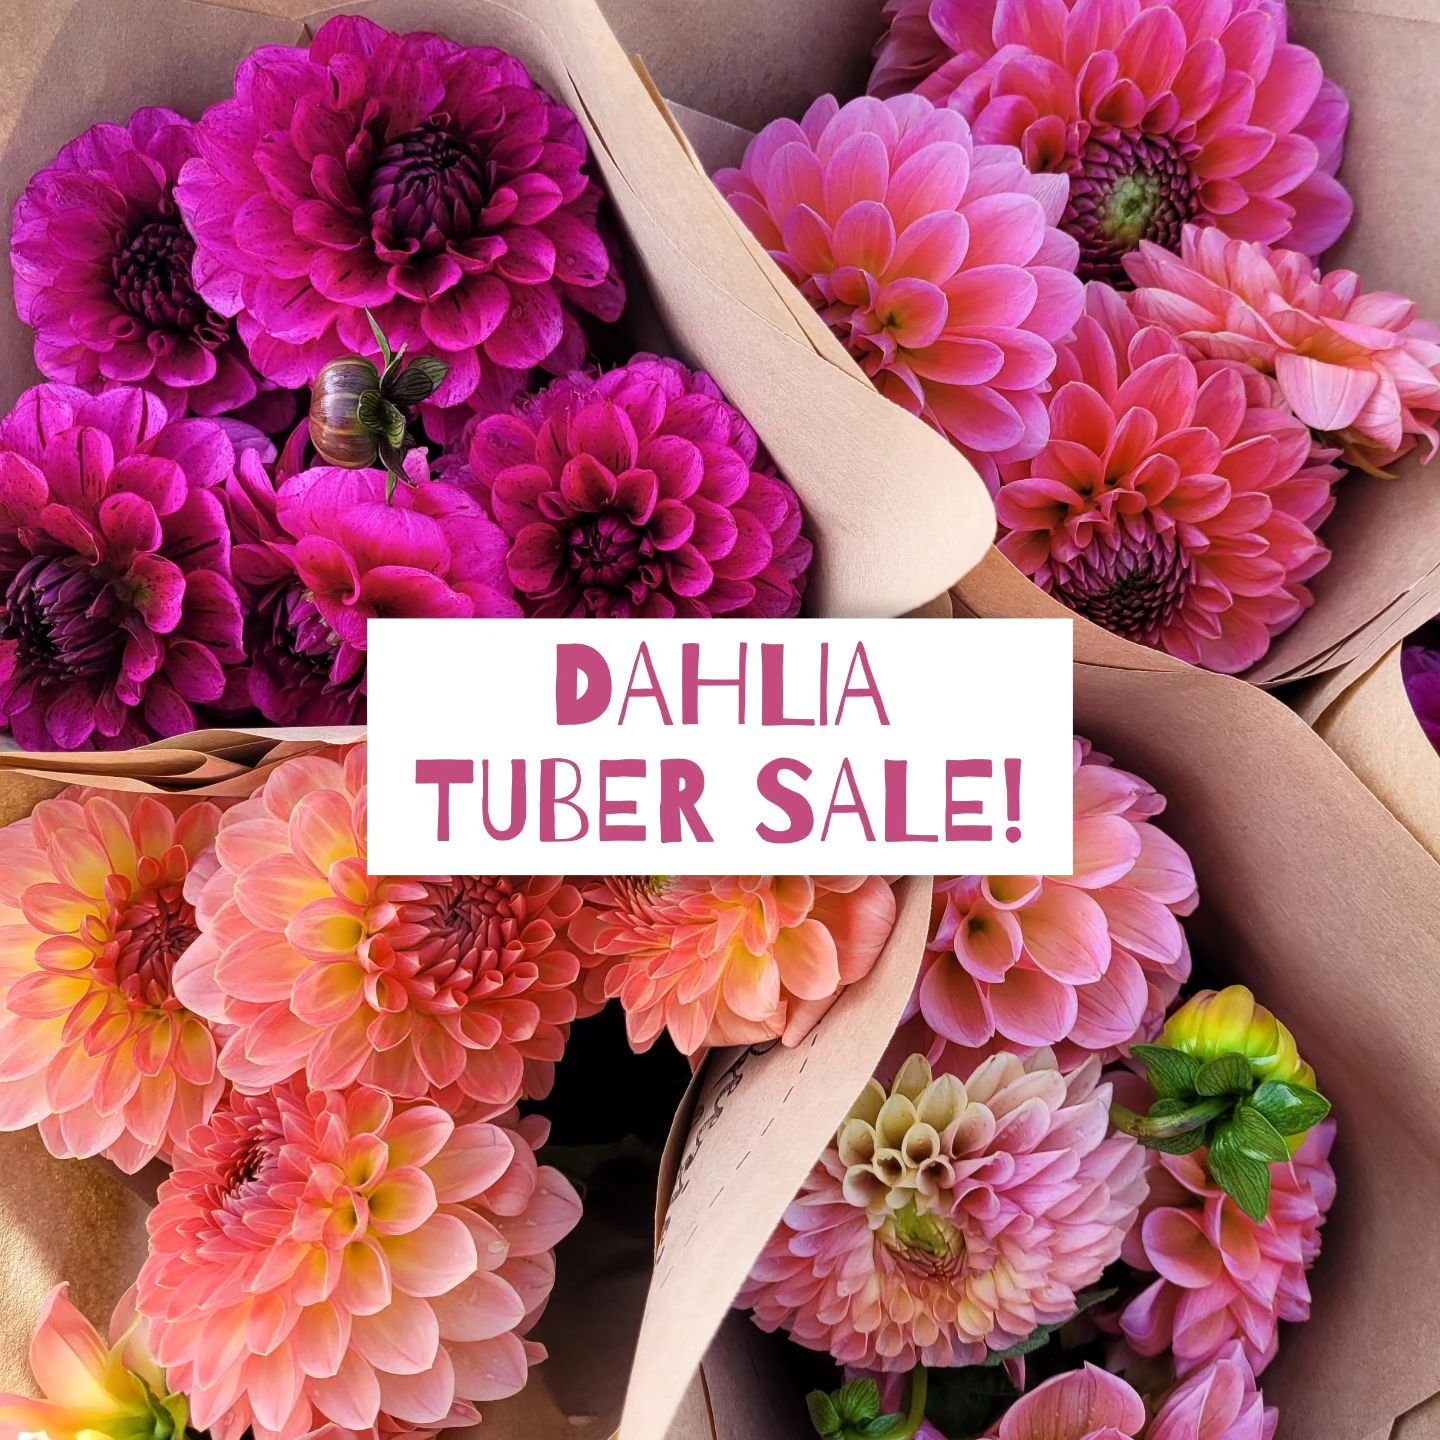 Dahlia Tuber sale! We are offering 20% off all remaining dahlia tubers! Use code SPRING at checkout! Code is valid through 4/28 🌸

Click the link in my bio or visit https://beeziesblooms.com/dahliatubers to shop! 

We are currently shipping the majo